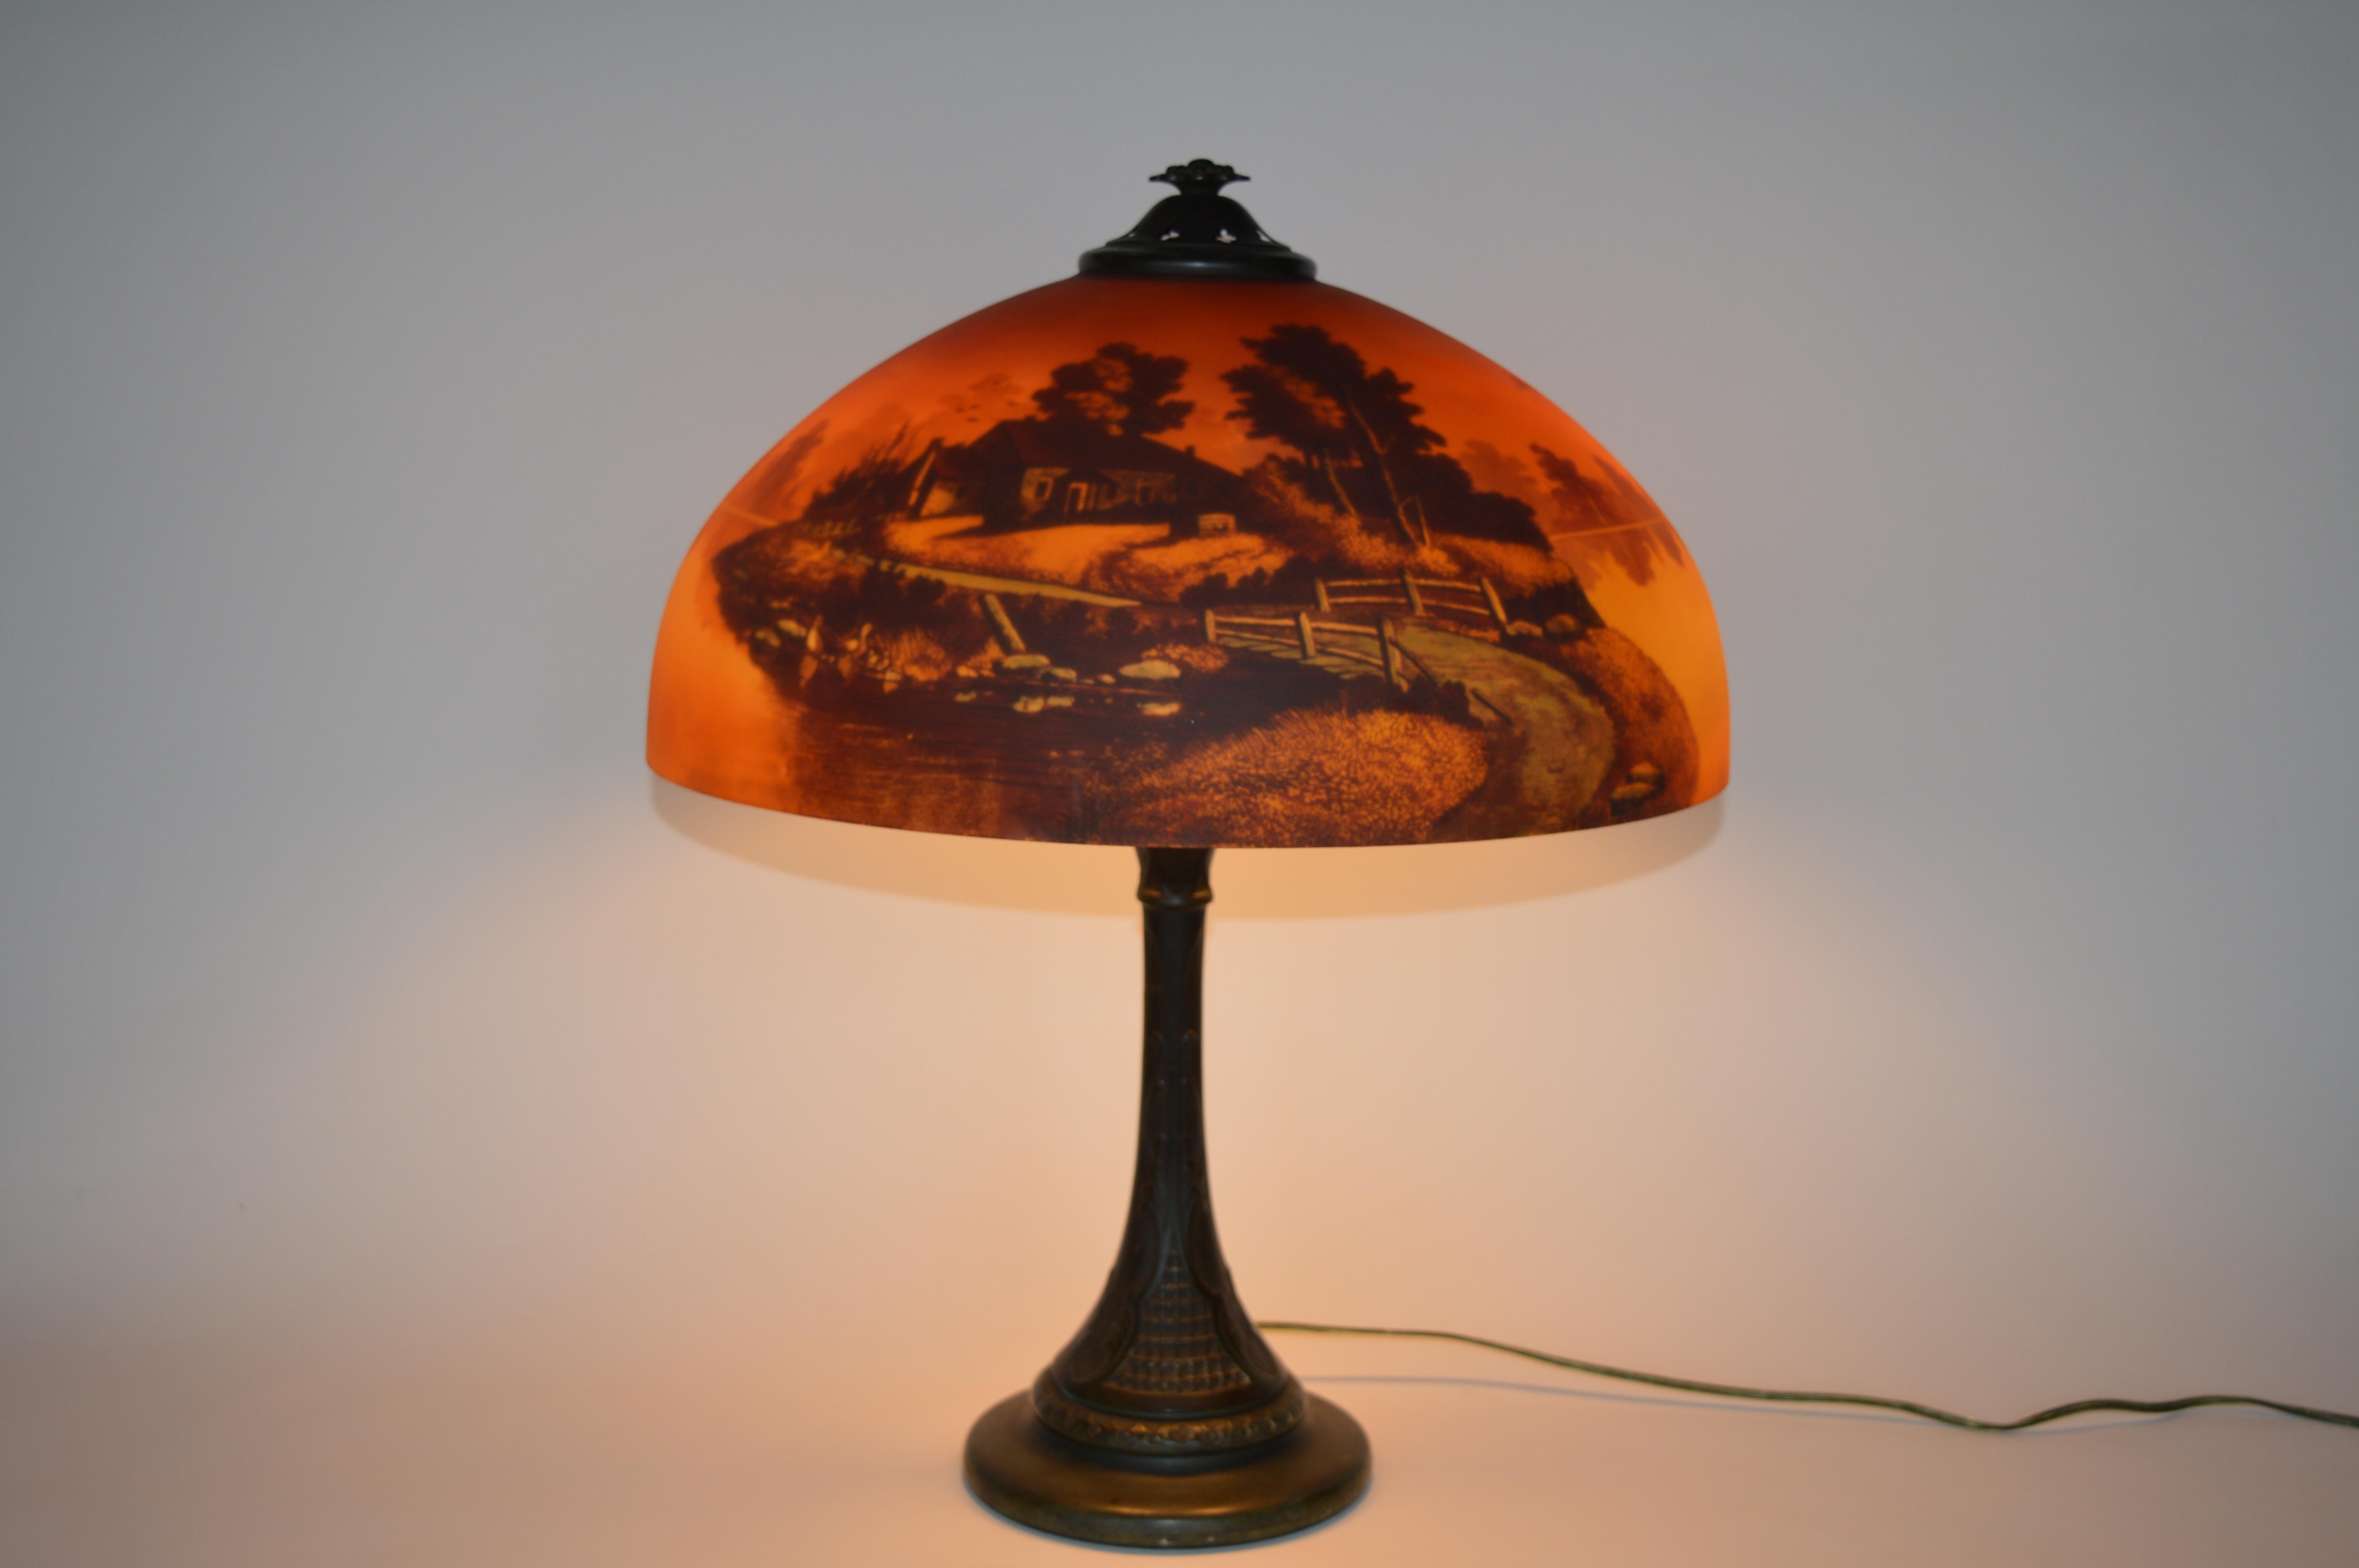 Phoenix sunset landscape table lamp,
circa 1920s reverse painted glass shade with a patinated metal base shade depicting a rural cottage sunset landscape 21 total inches high, shade: 18 inches diameter, 8 inches high.